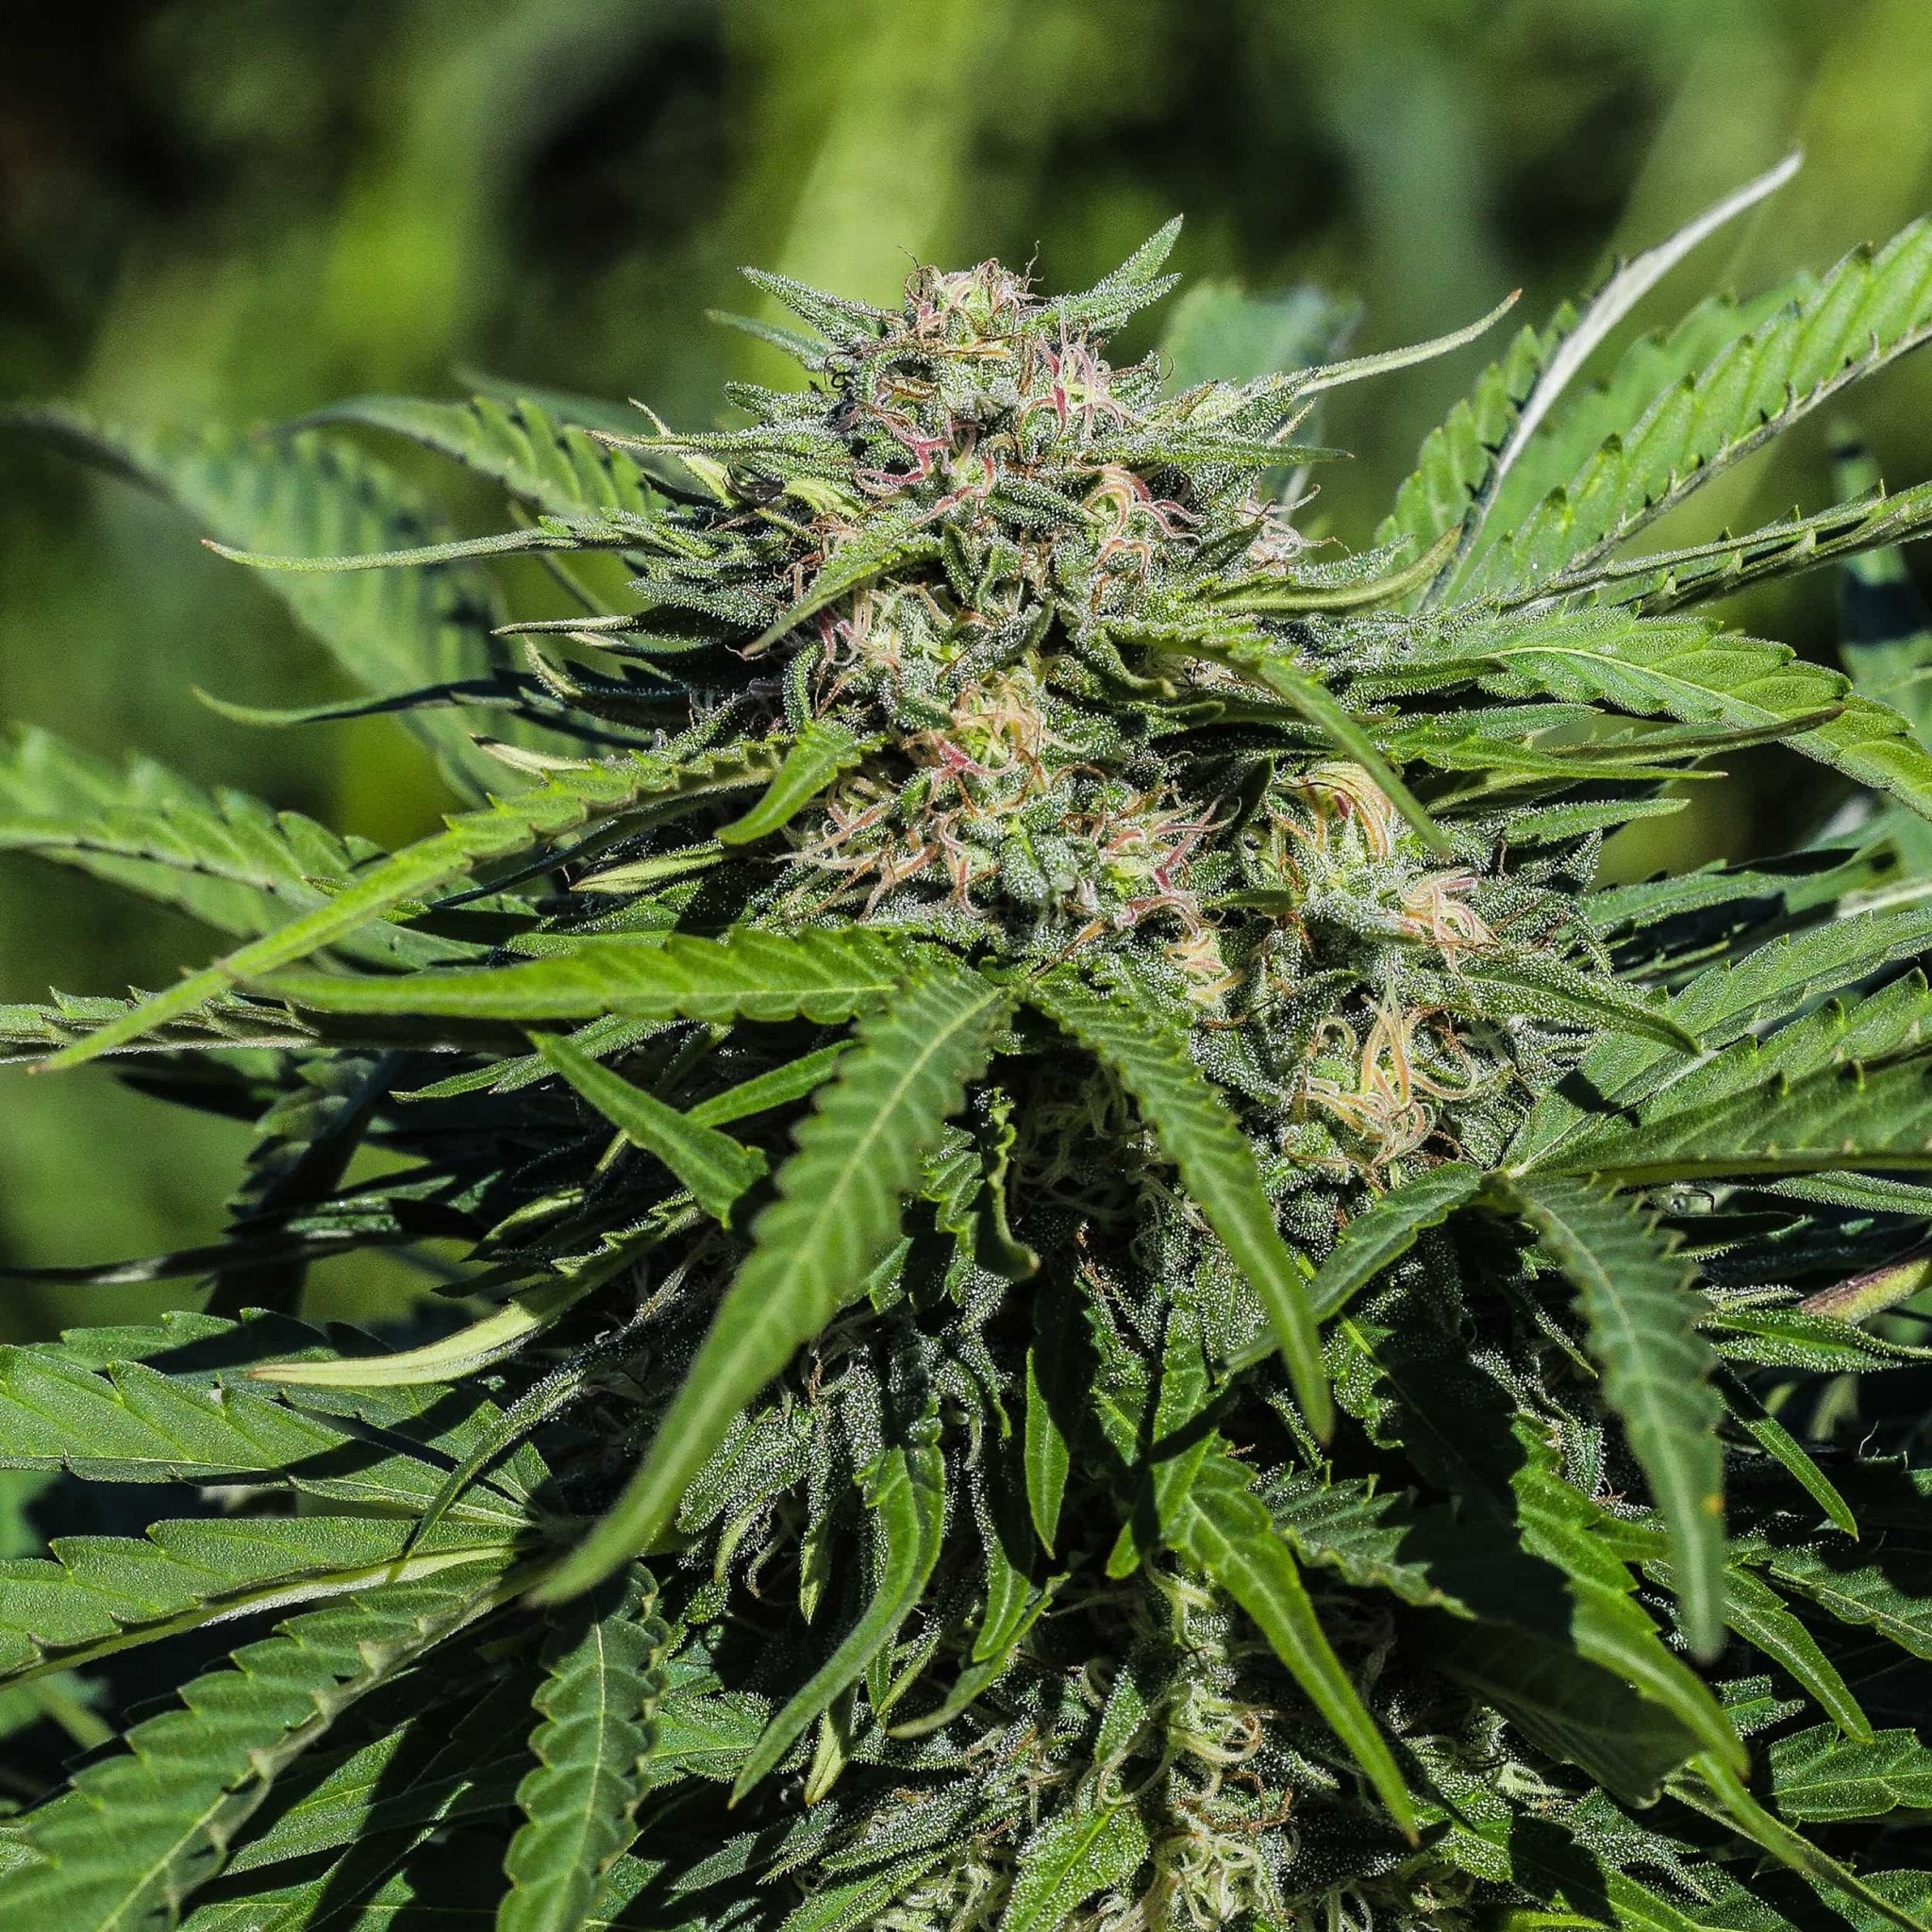 Trichome covered Lifter flowers shimmer in the sunlight. These highly sought after high CBD seeds produce plants with huge flowers and high terpene content.